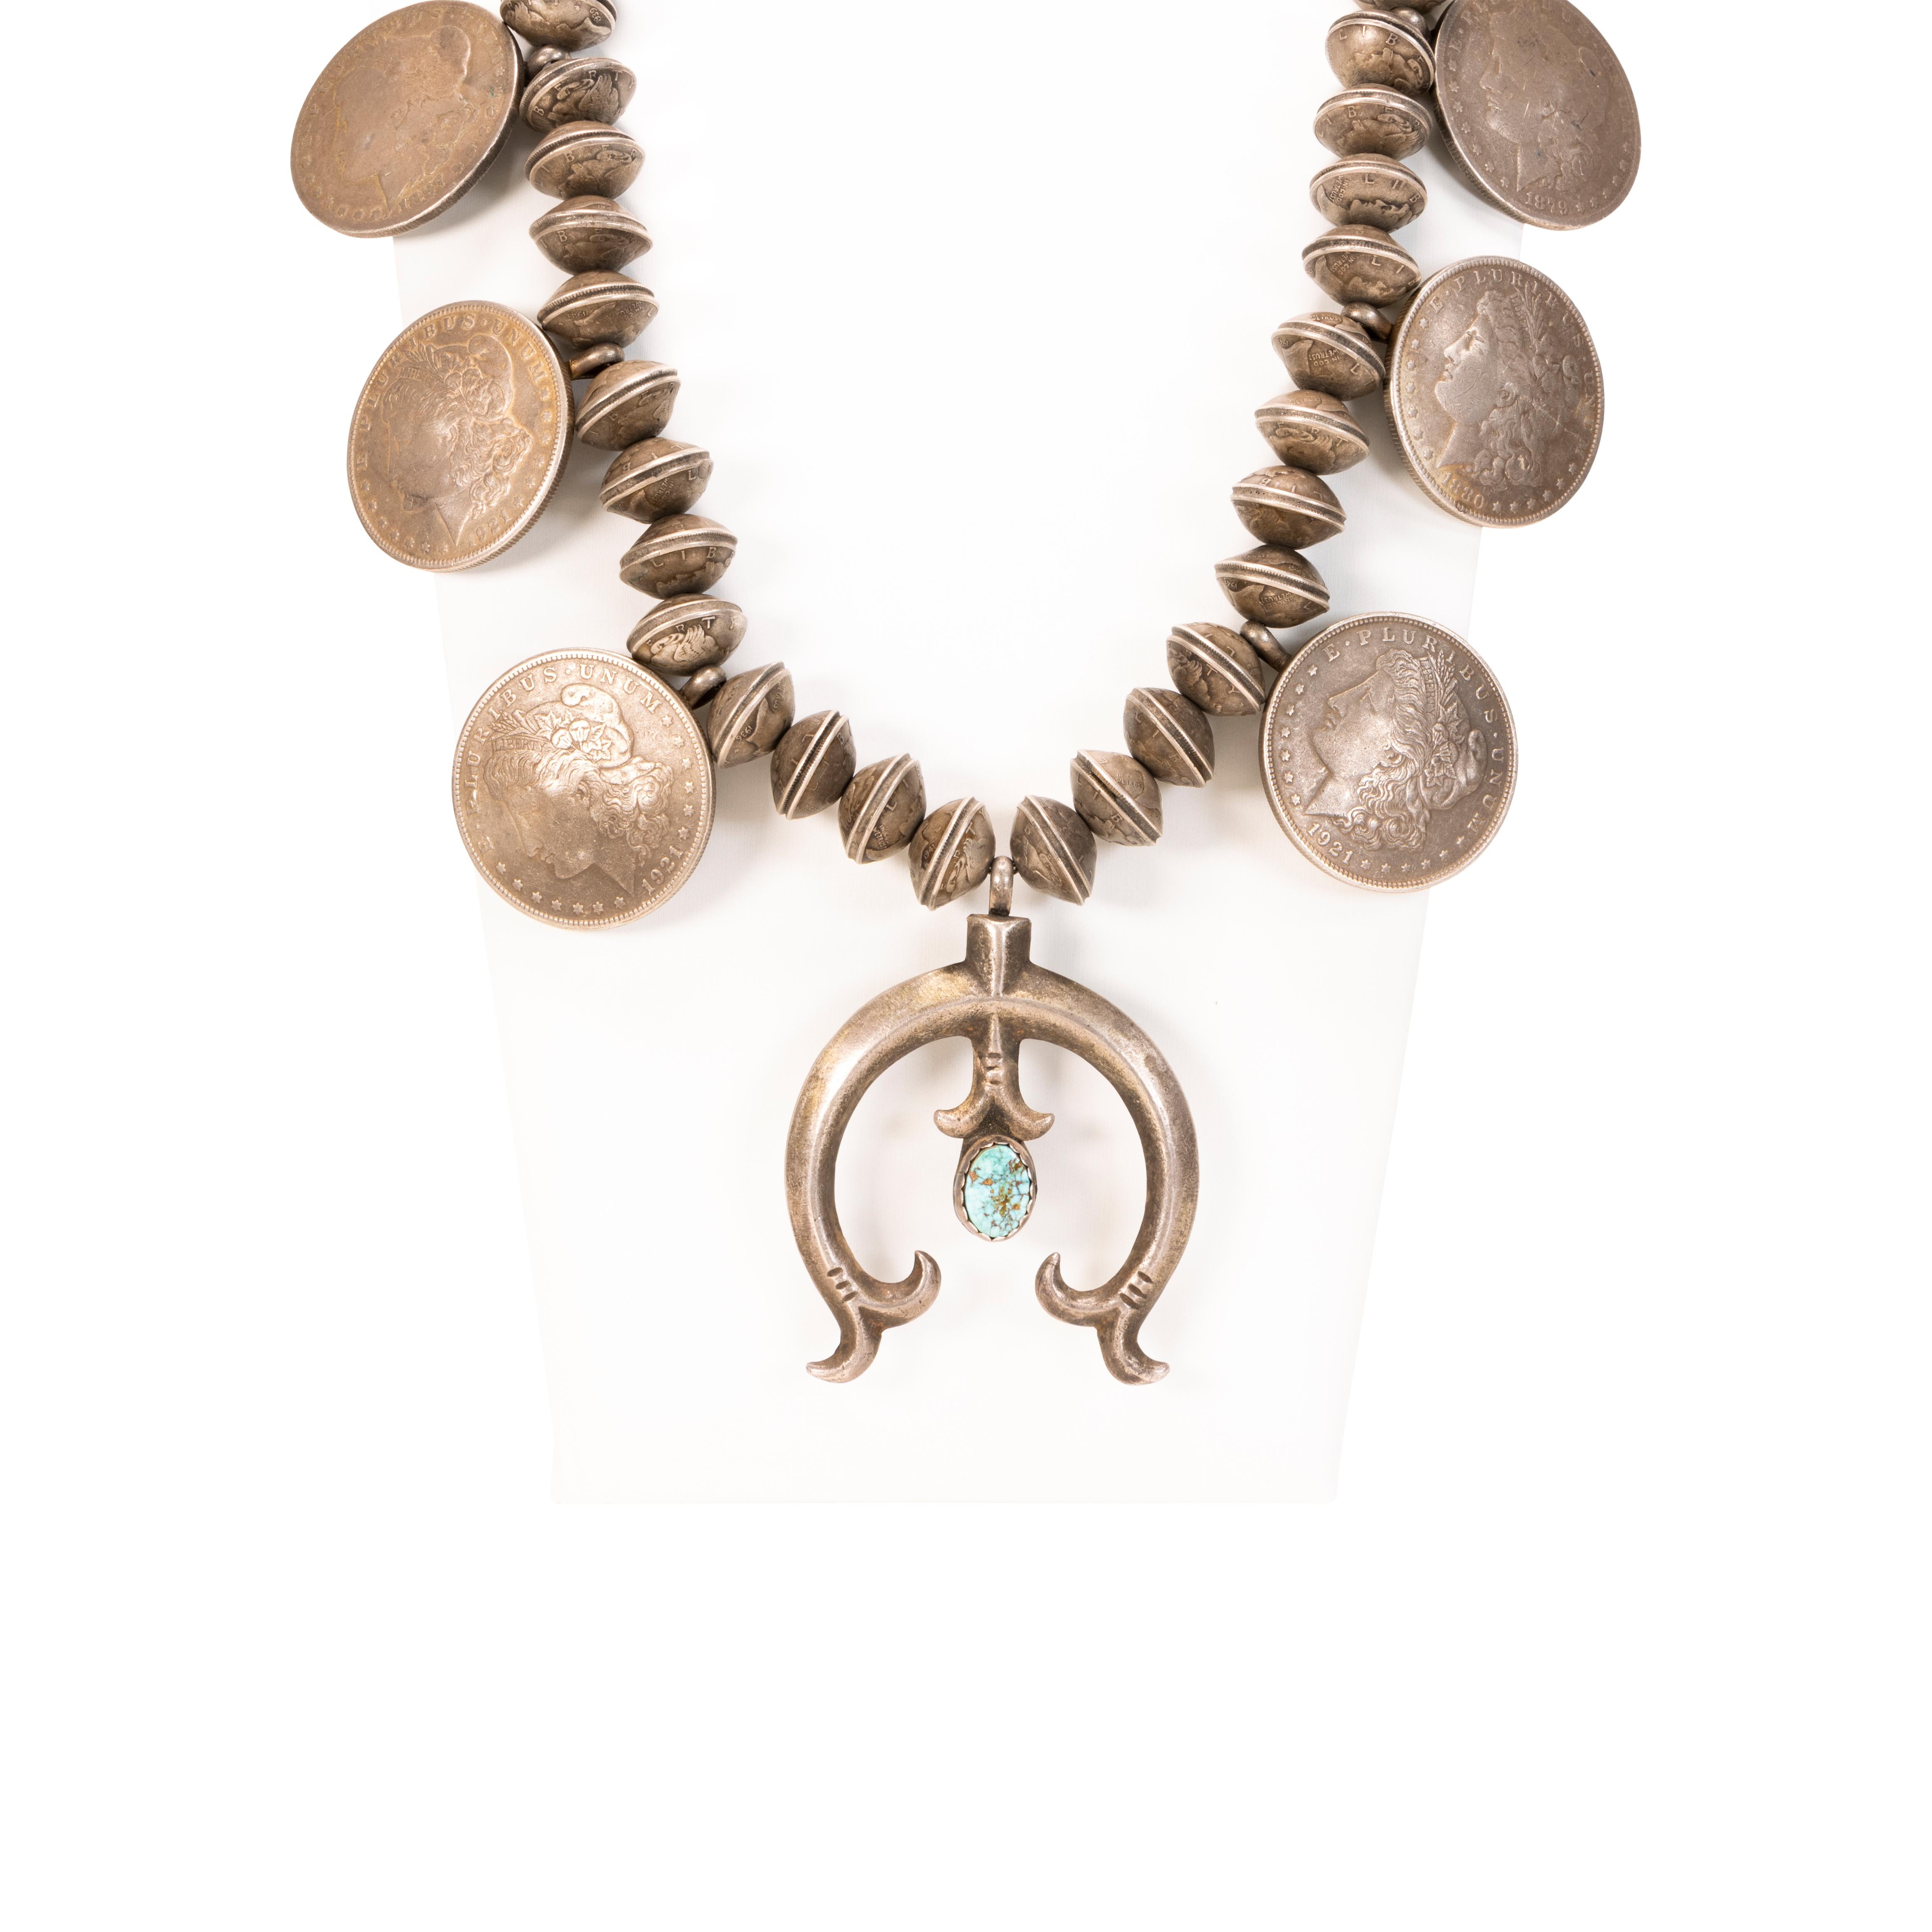 Navajo turquoise and sterling silver squash blossom necklace made from soldered mercury dime, or winged Liberty Head dimes with sand cast naja containing a small turquoise stone. The earliest coin dates 1879 and latest dates 1931. These mercury